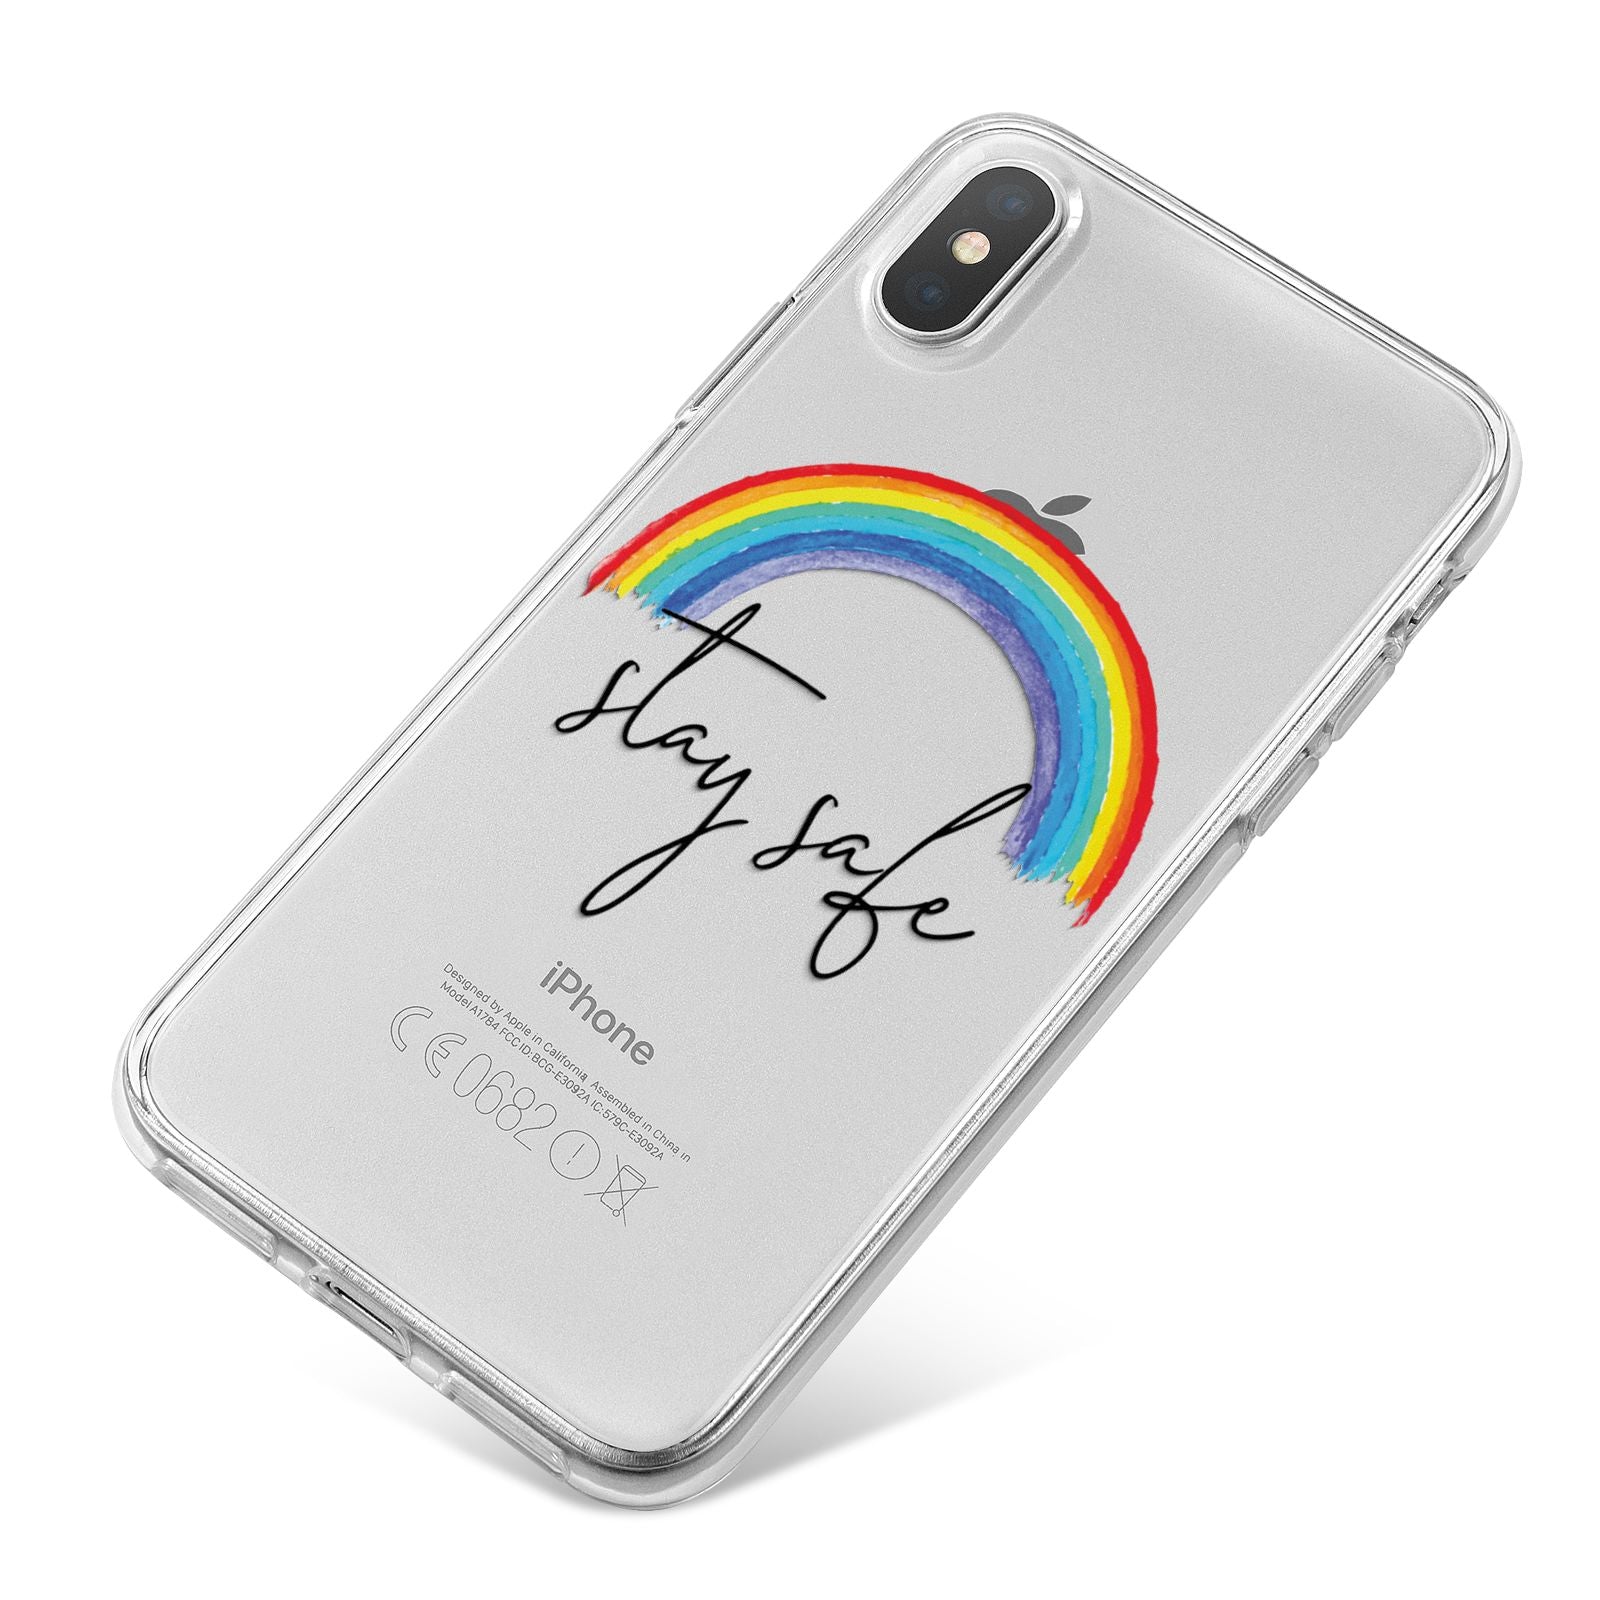 Stay Safe Rainbow iPhone X Bumper Case on Silver iPhone